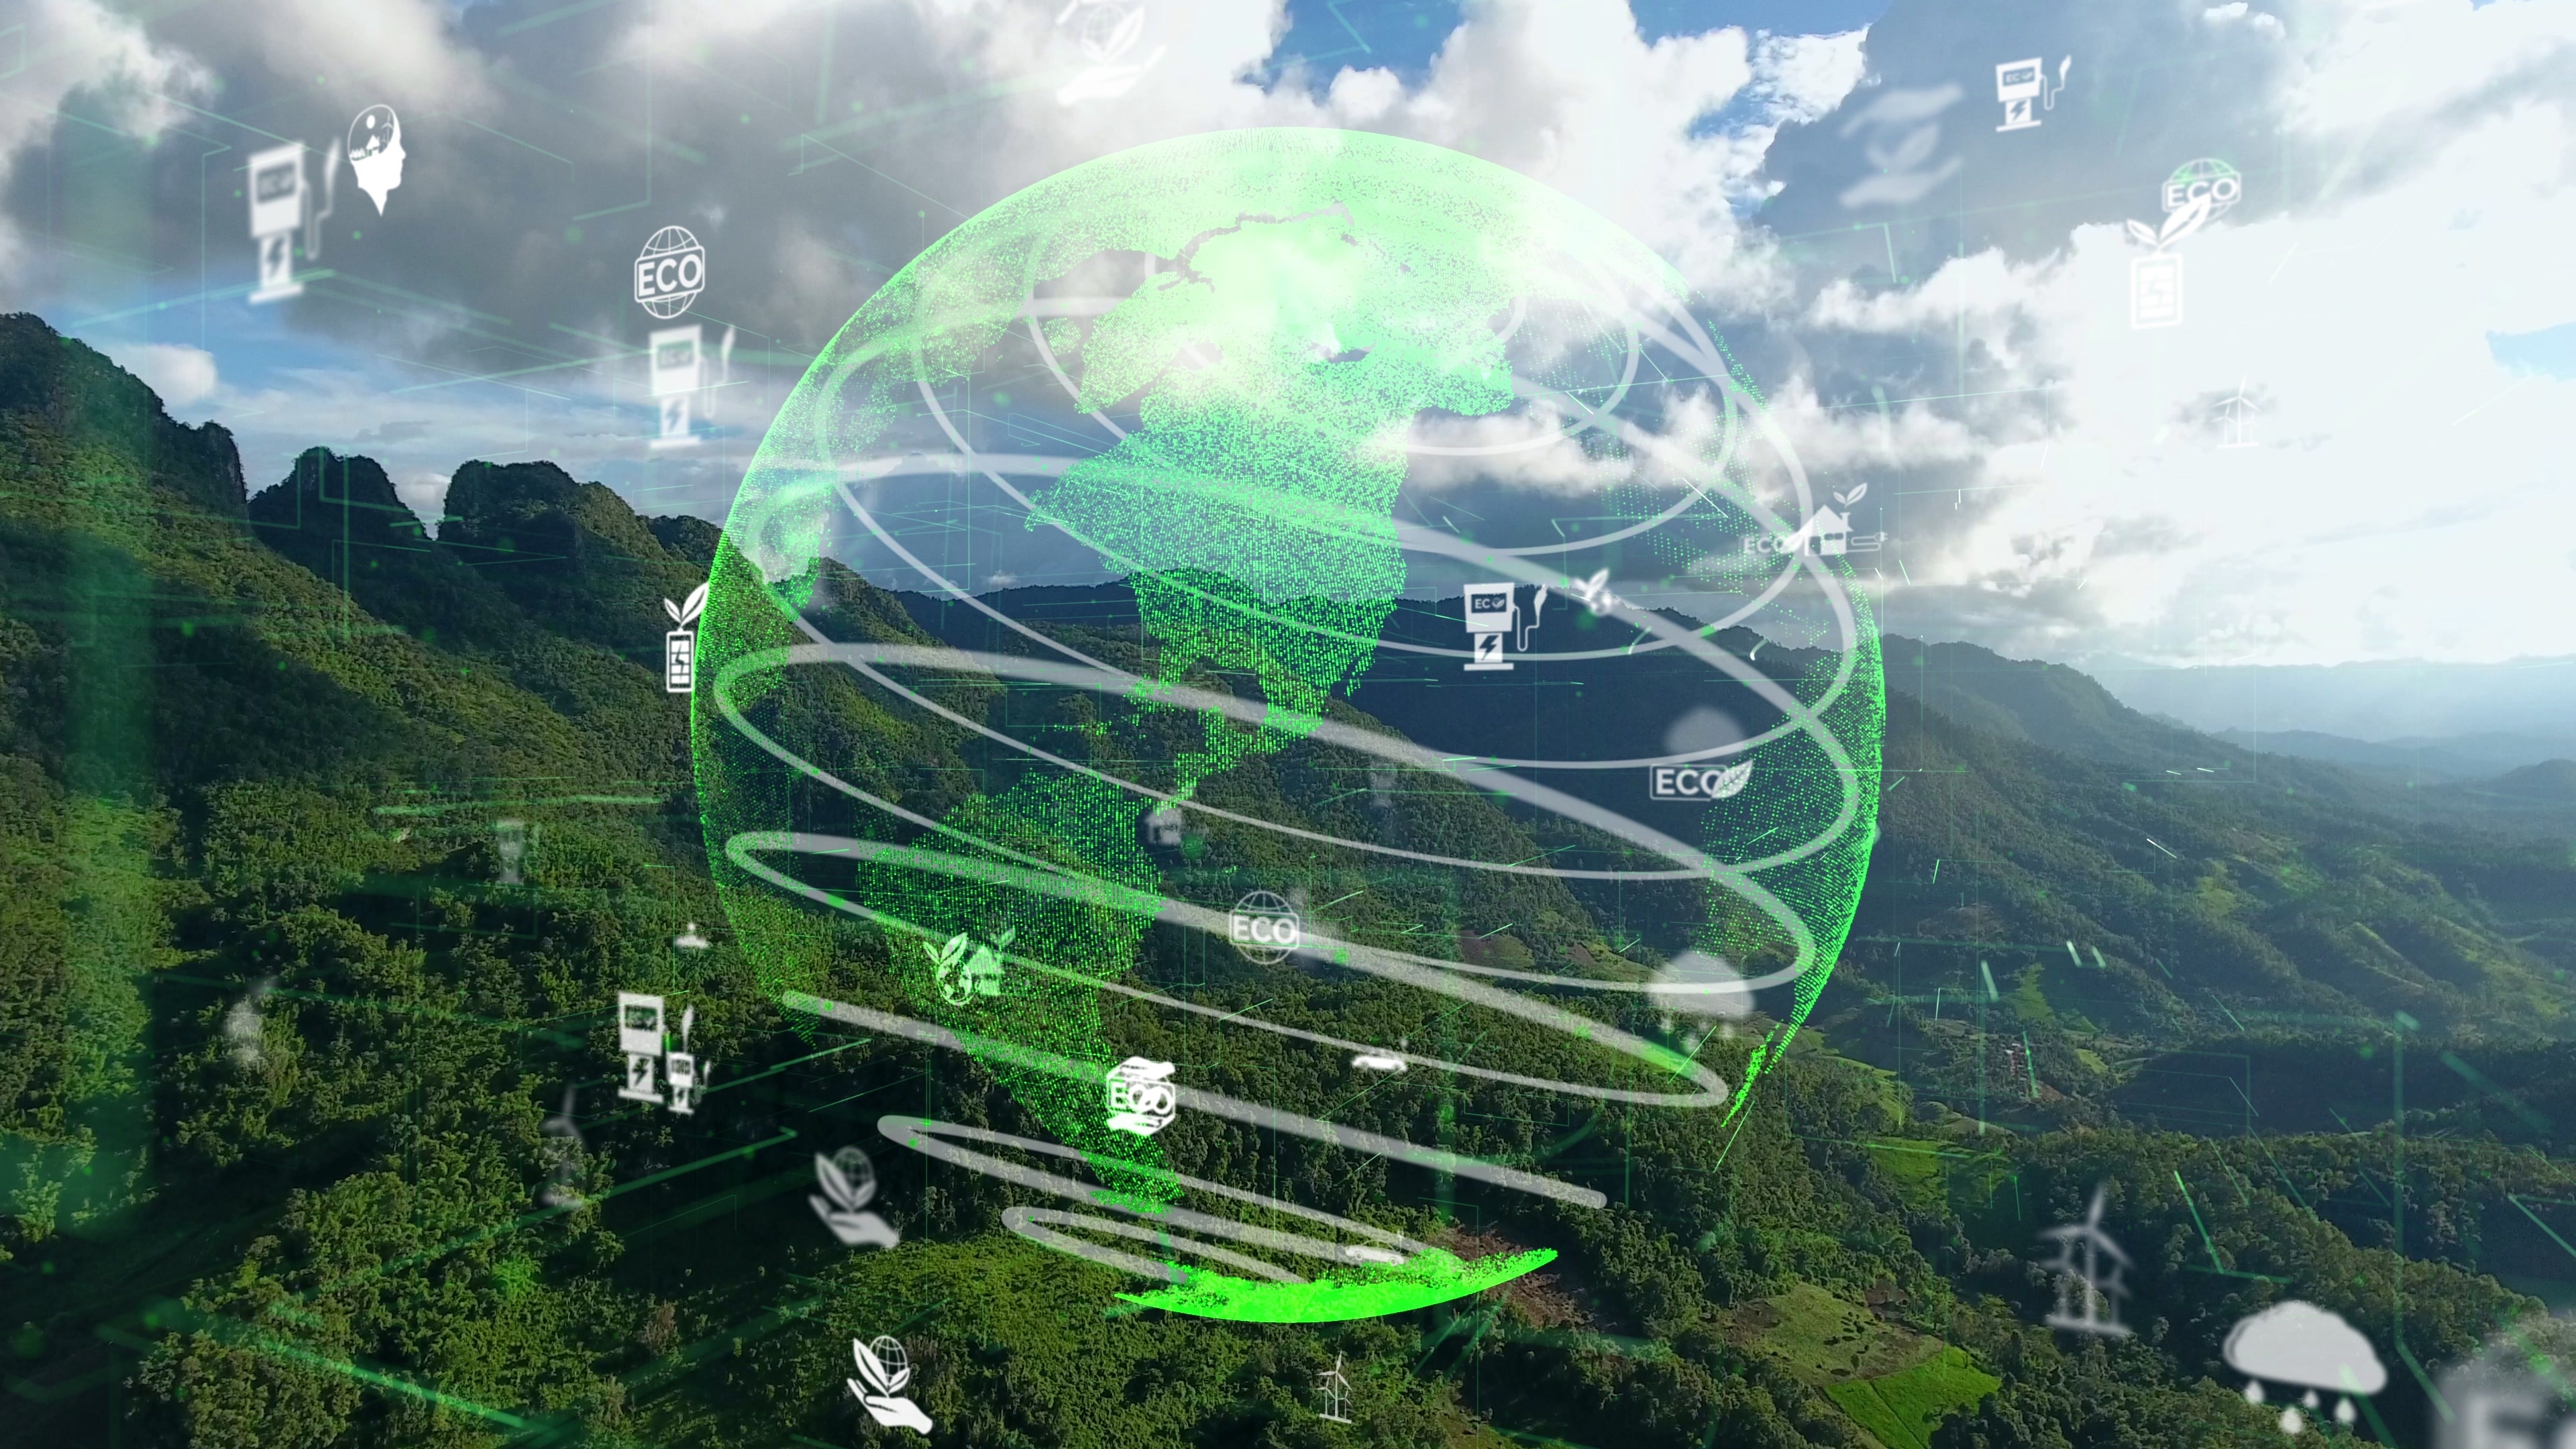 Transparent globe imposed over green, mountainous image, with small symbols representing renewable energy.